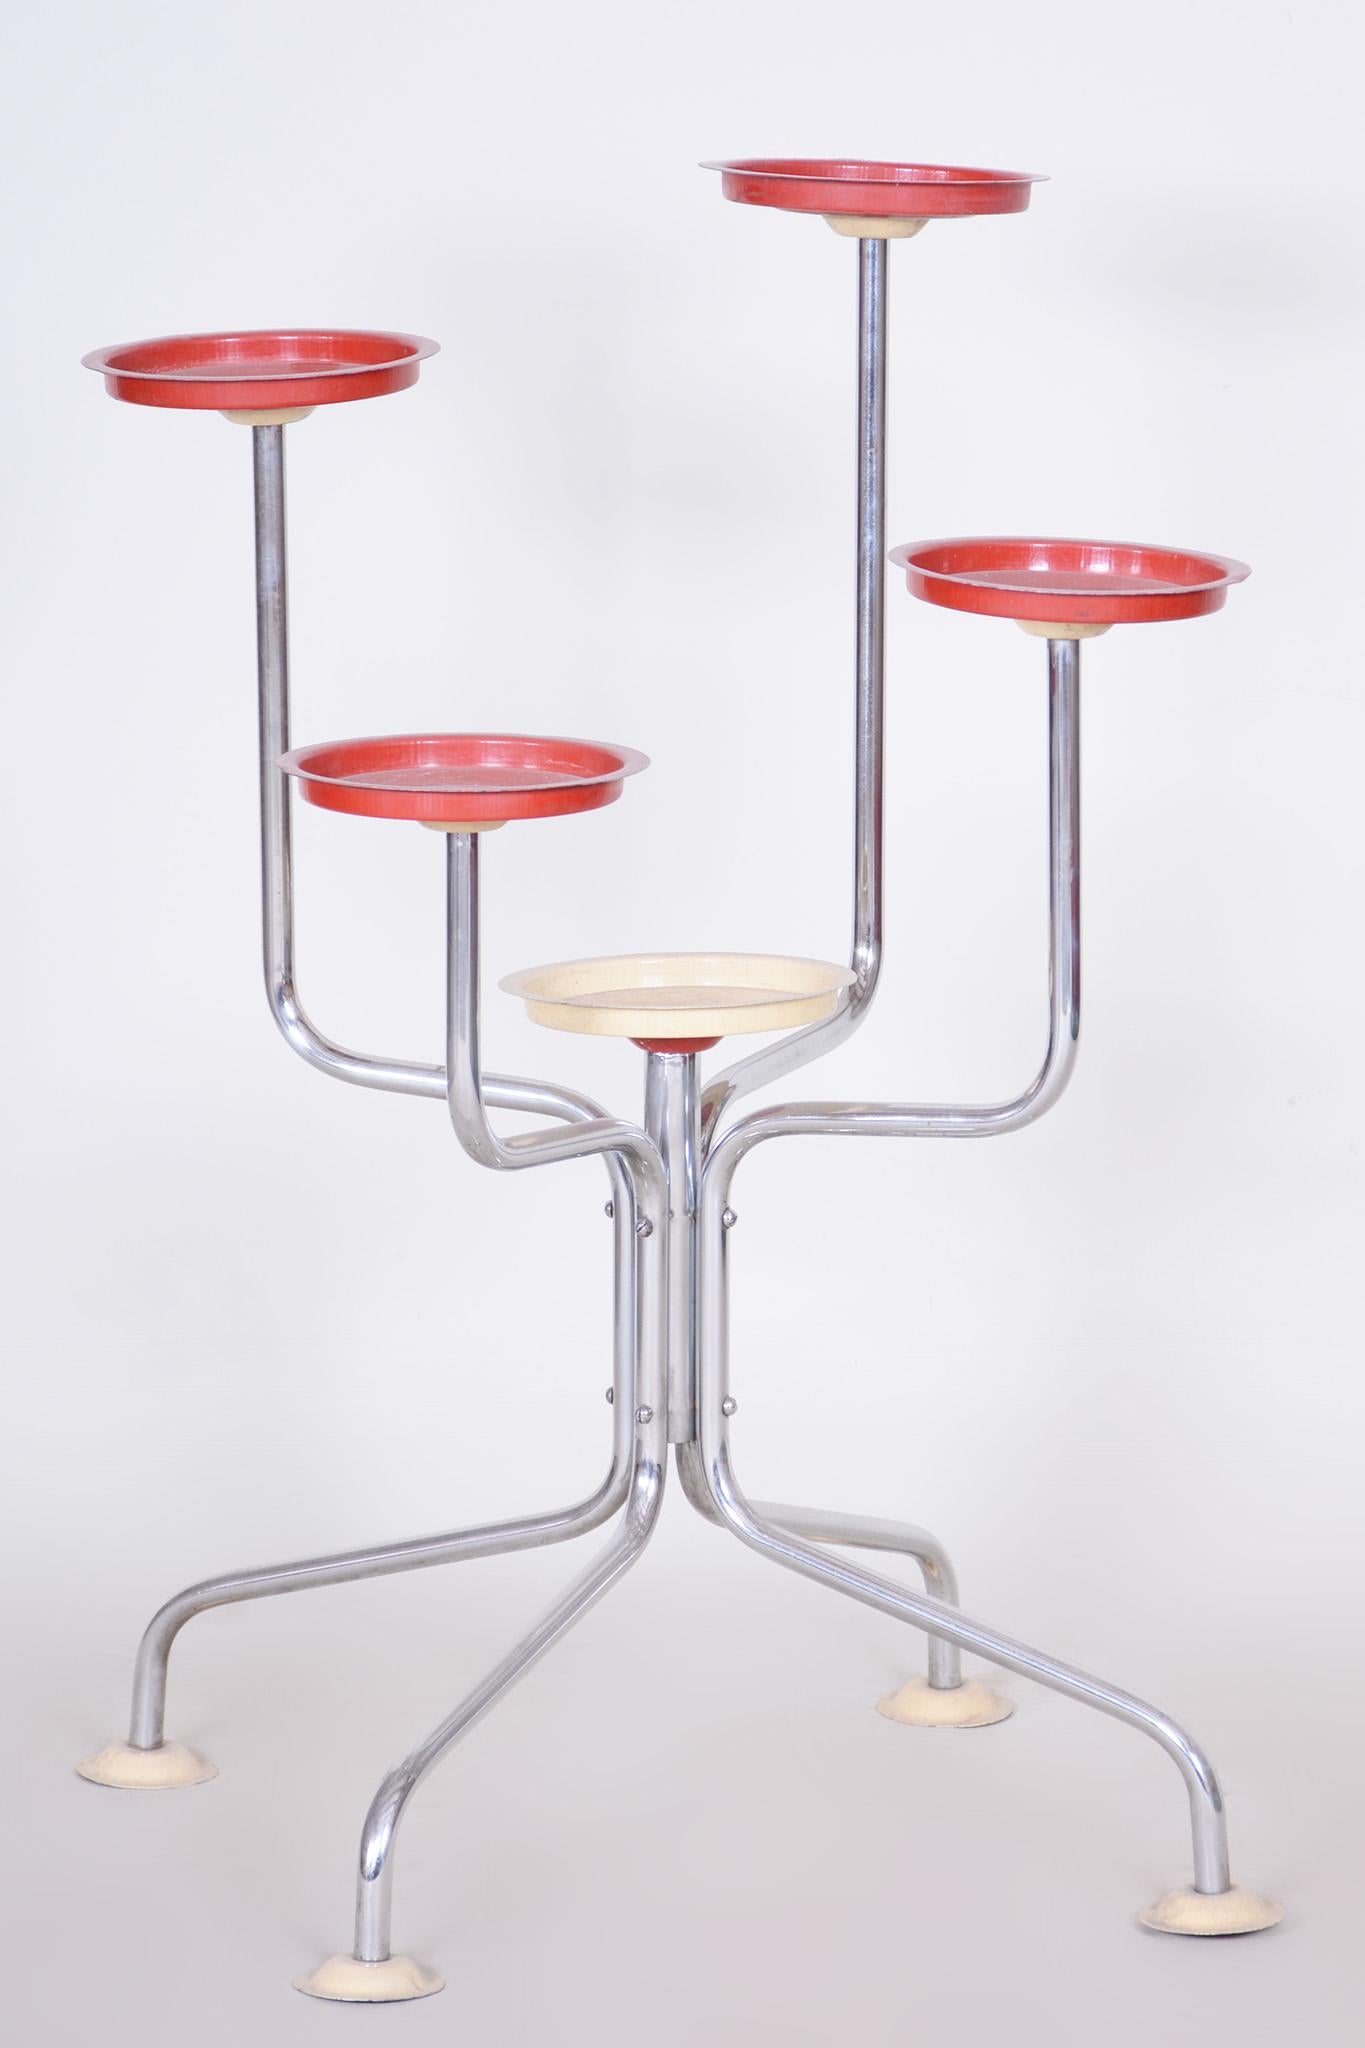 Czech Bauhaus Flower Stand Made of Chrome Plated Steel, Stable, 1930s For Sale 4